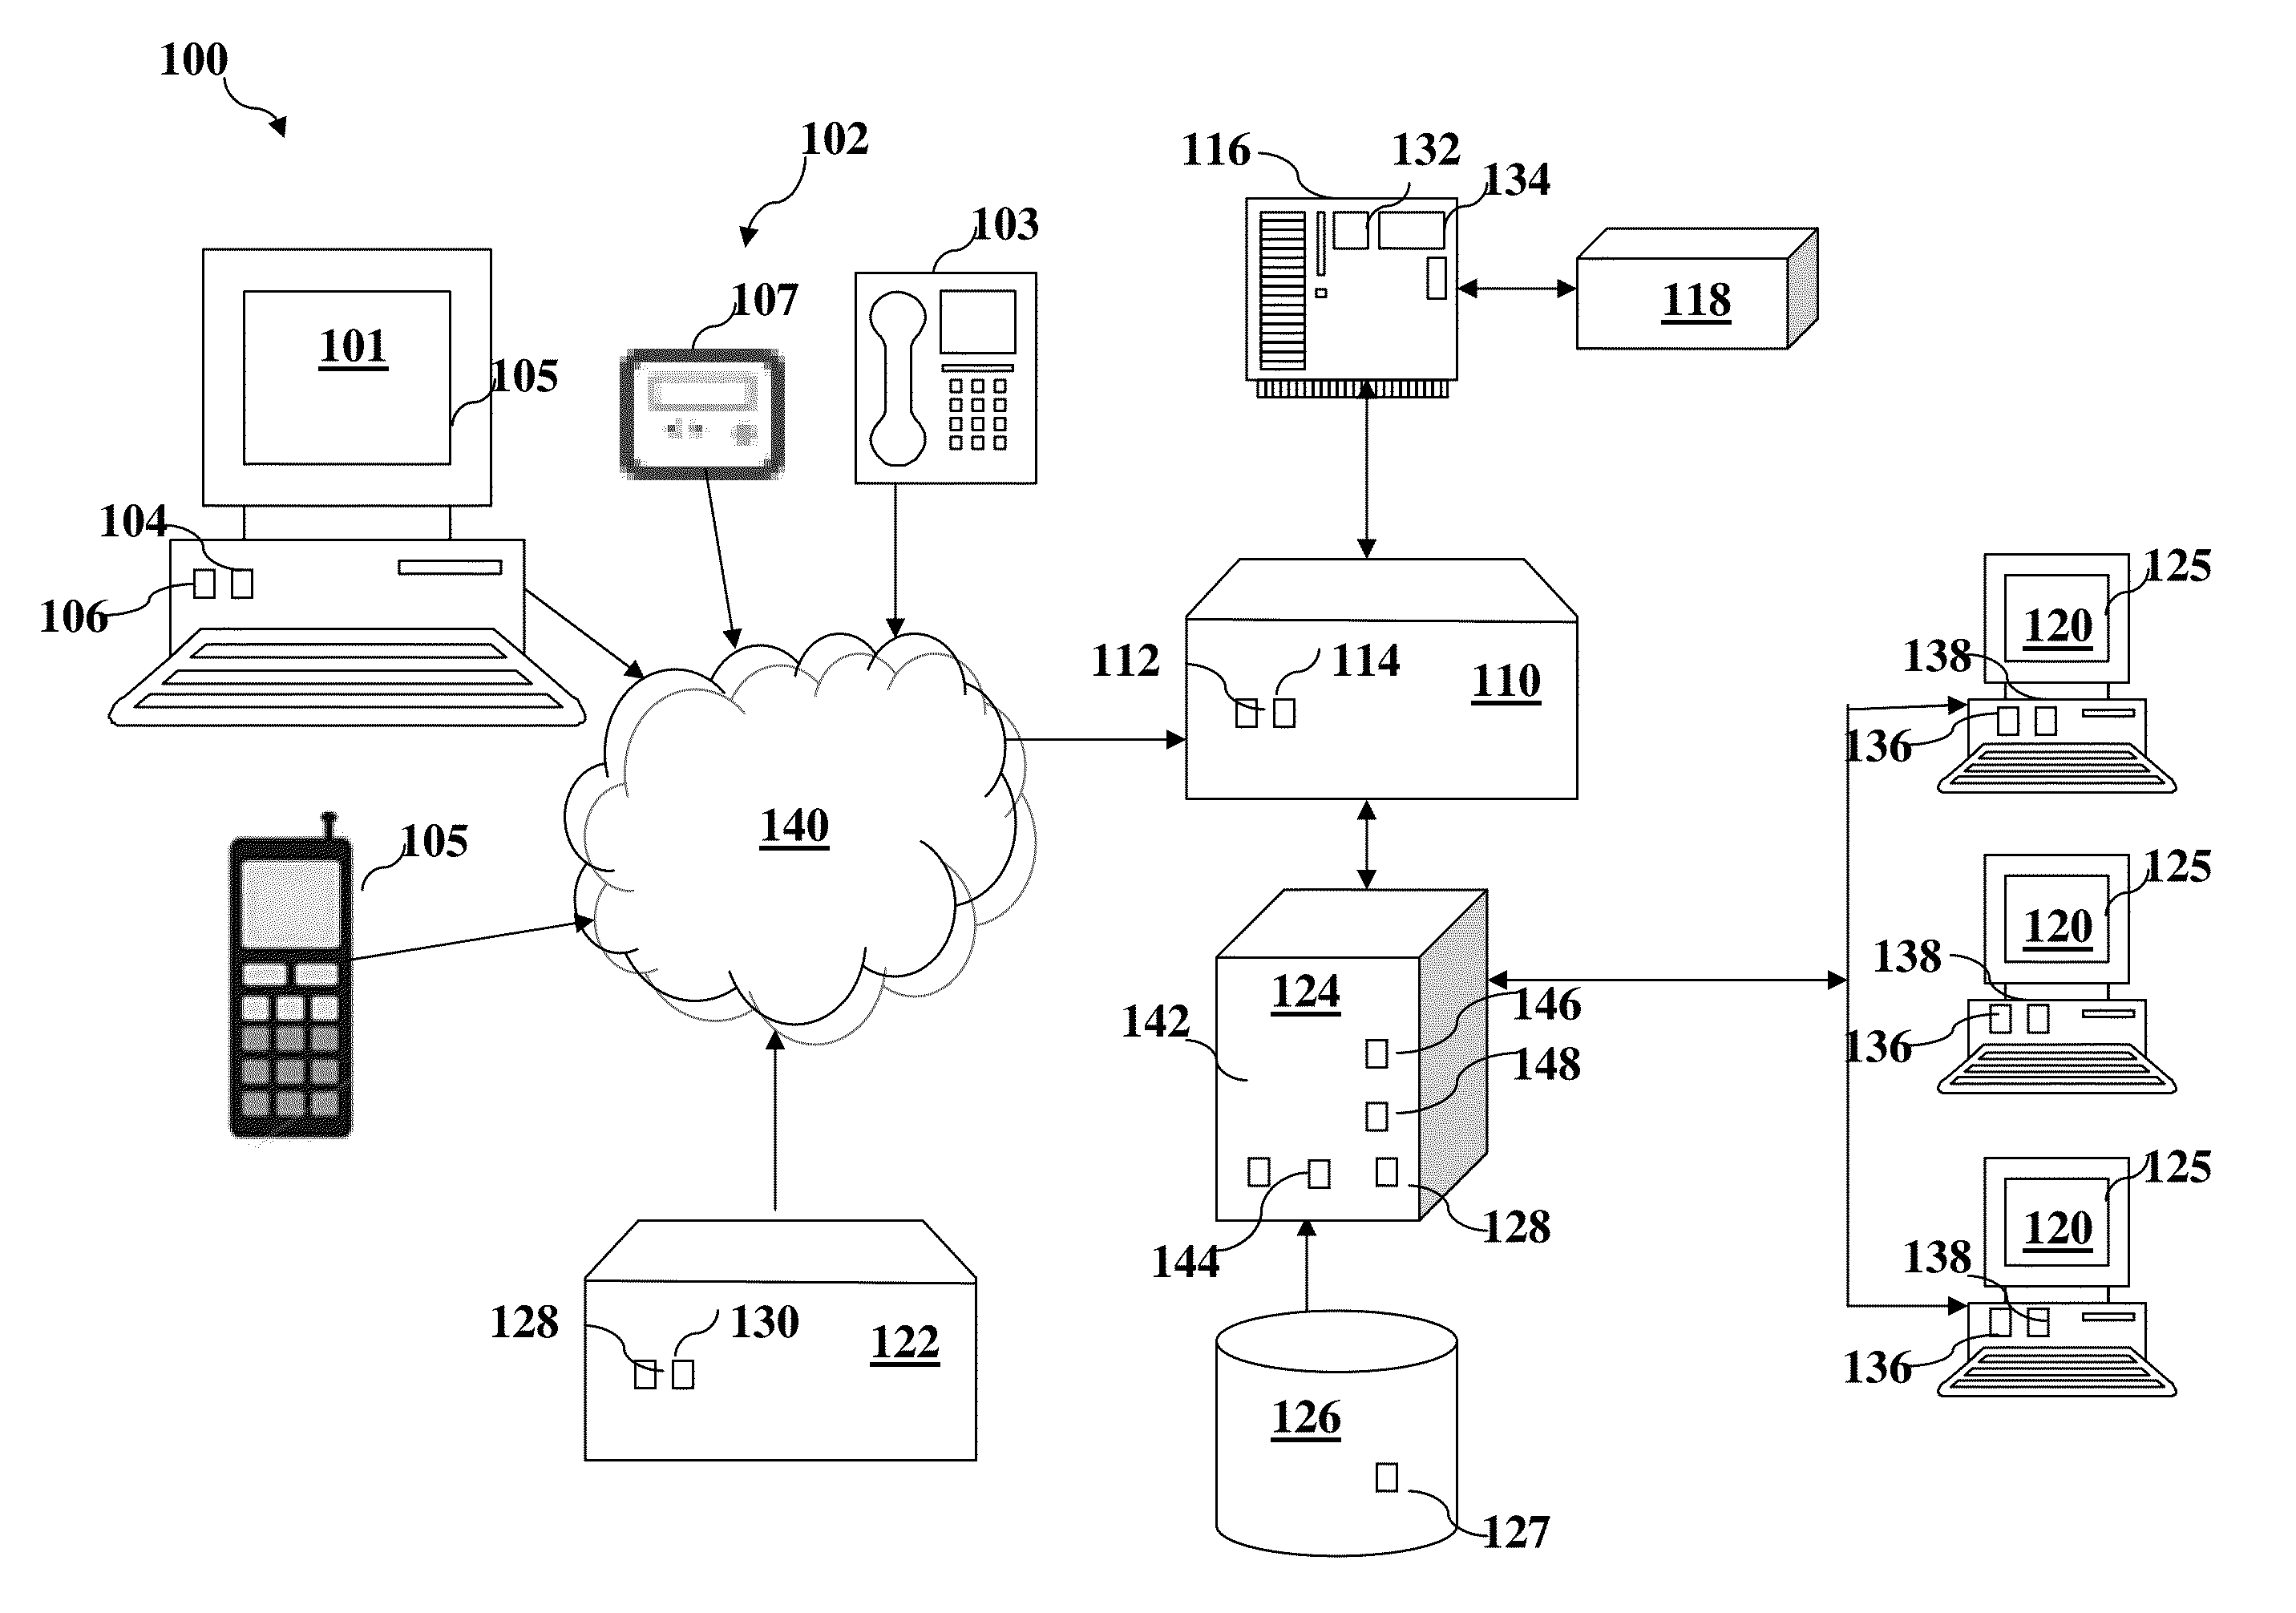 System and method for resolving customer communications